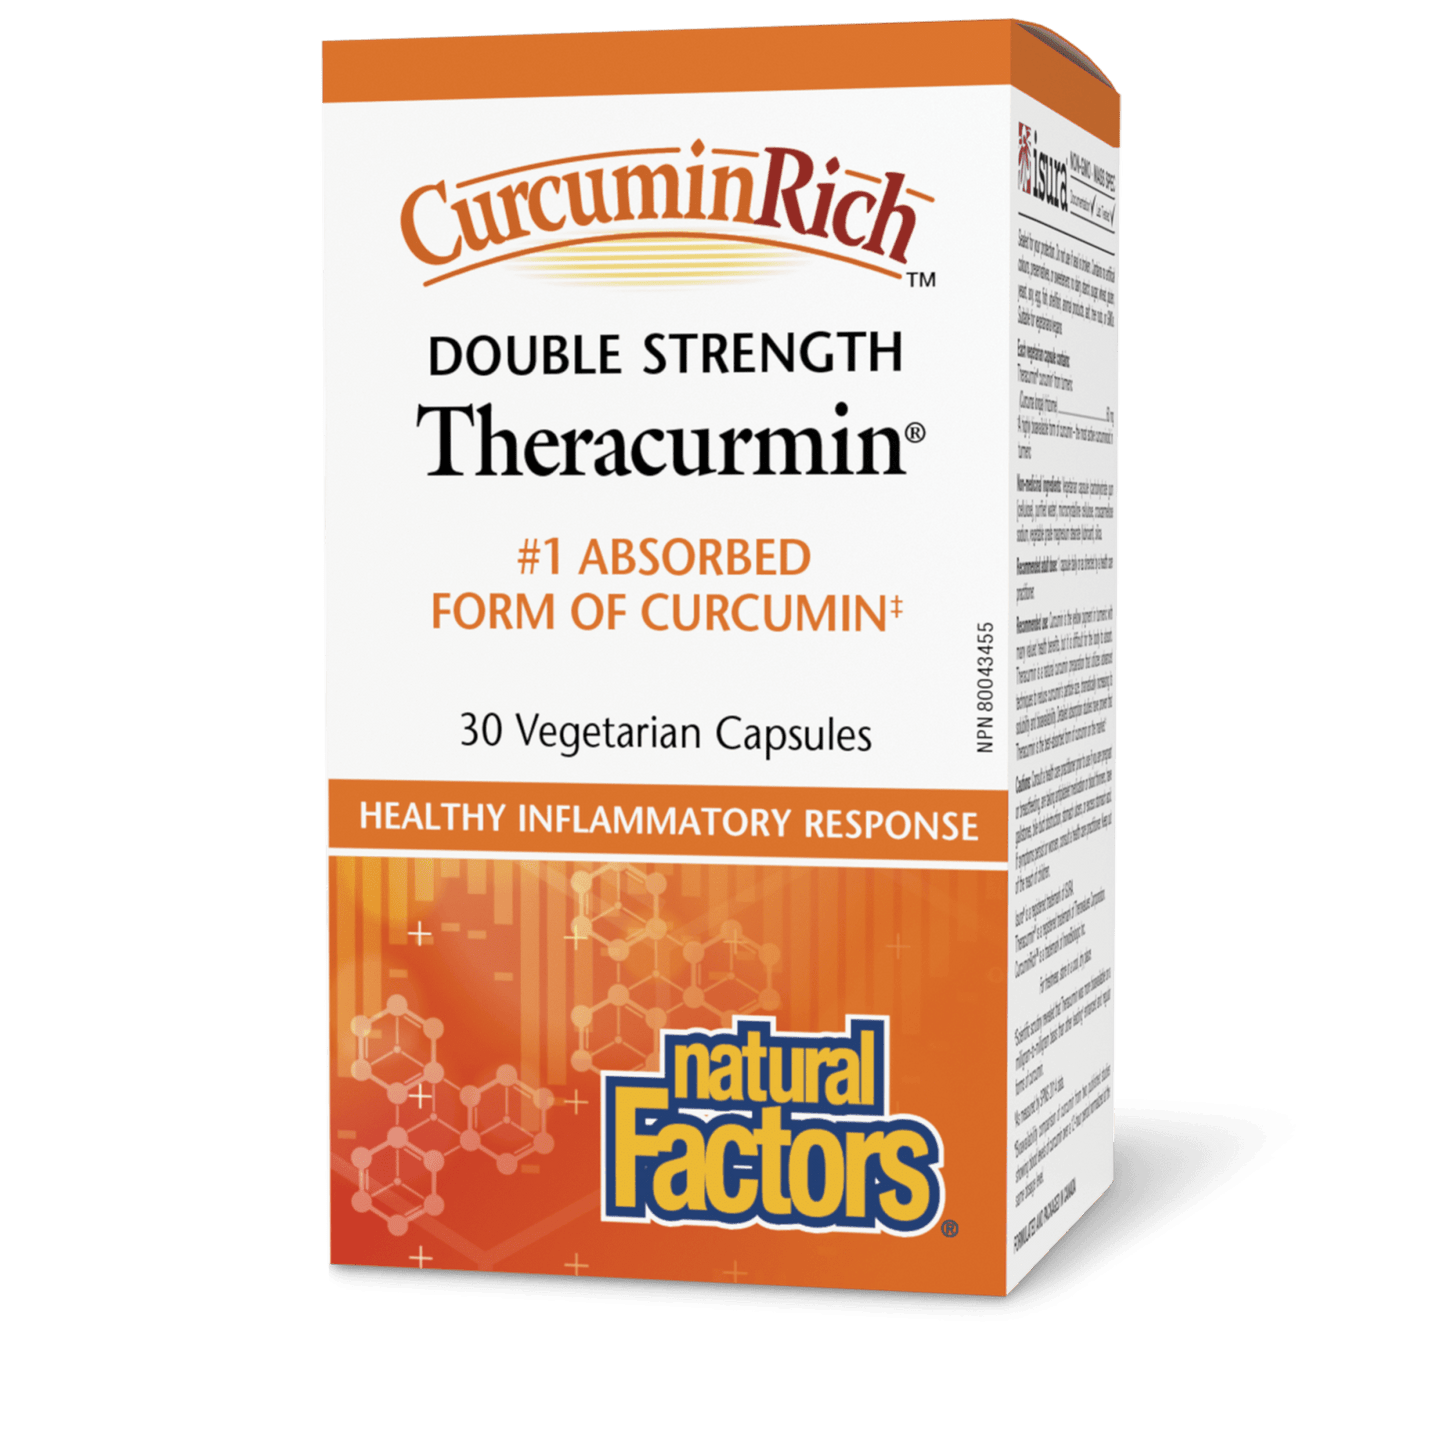 Theracurmin Double Strength, CurcuminRich, Natural Factors|v|image|4543